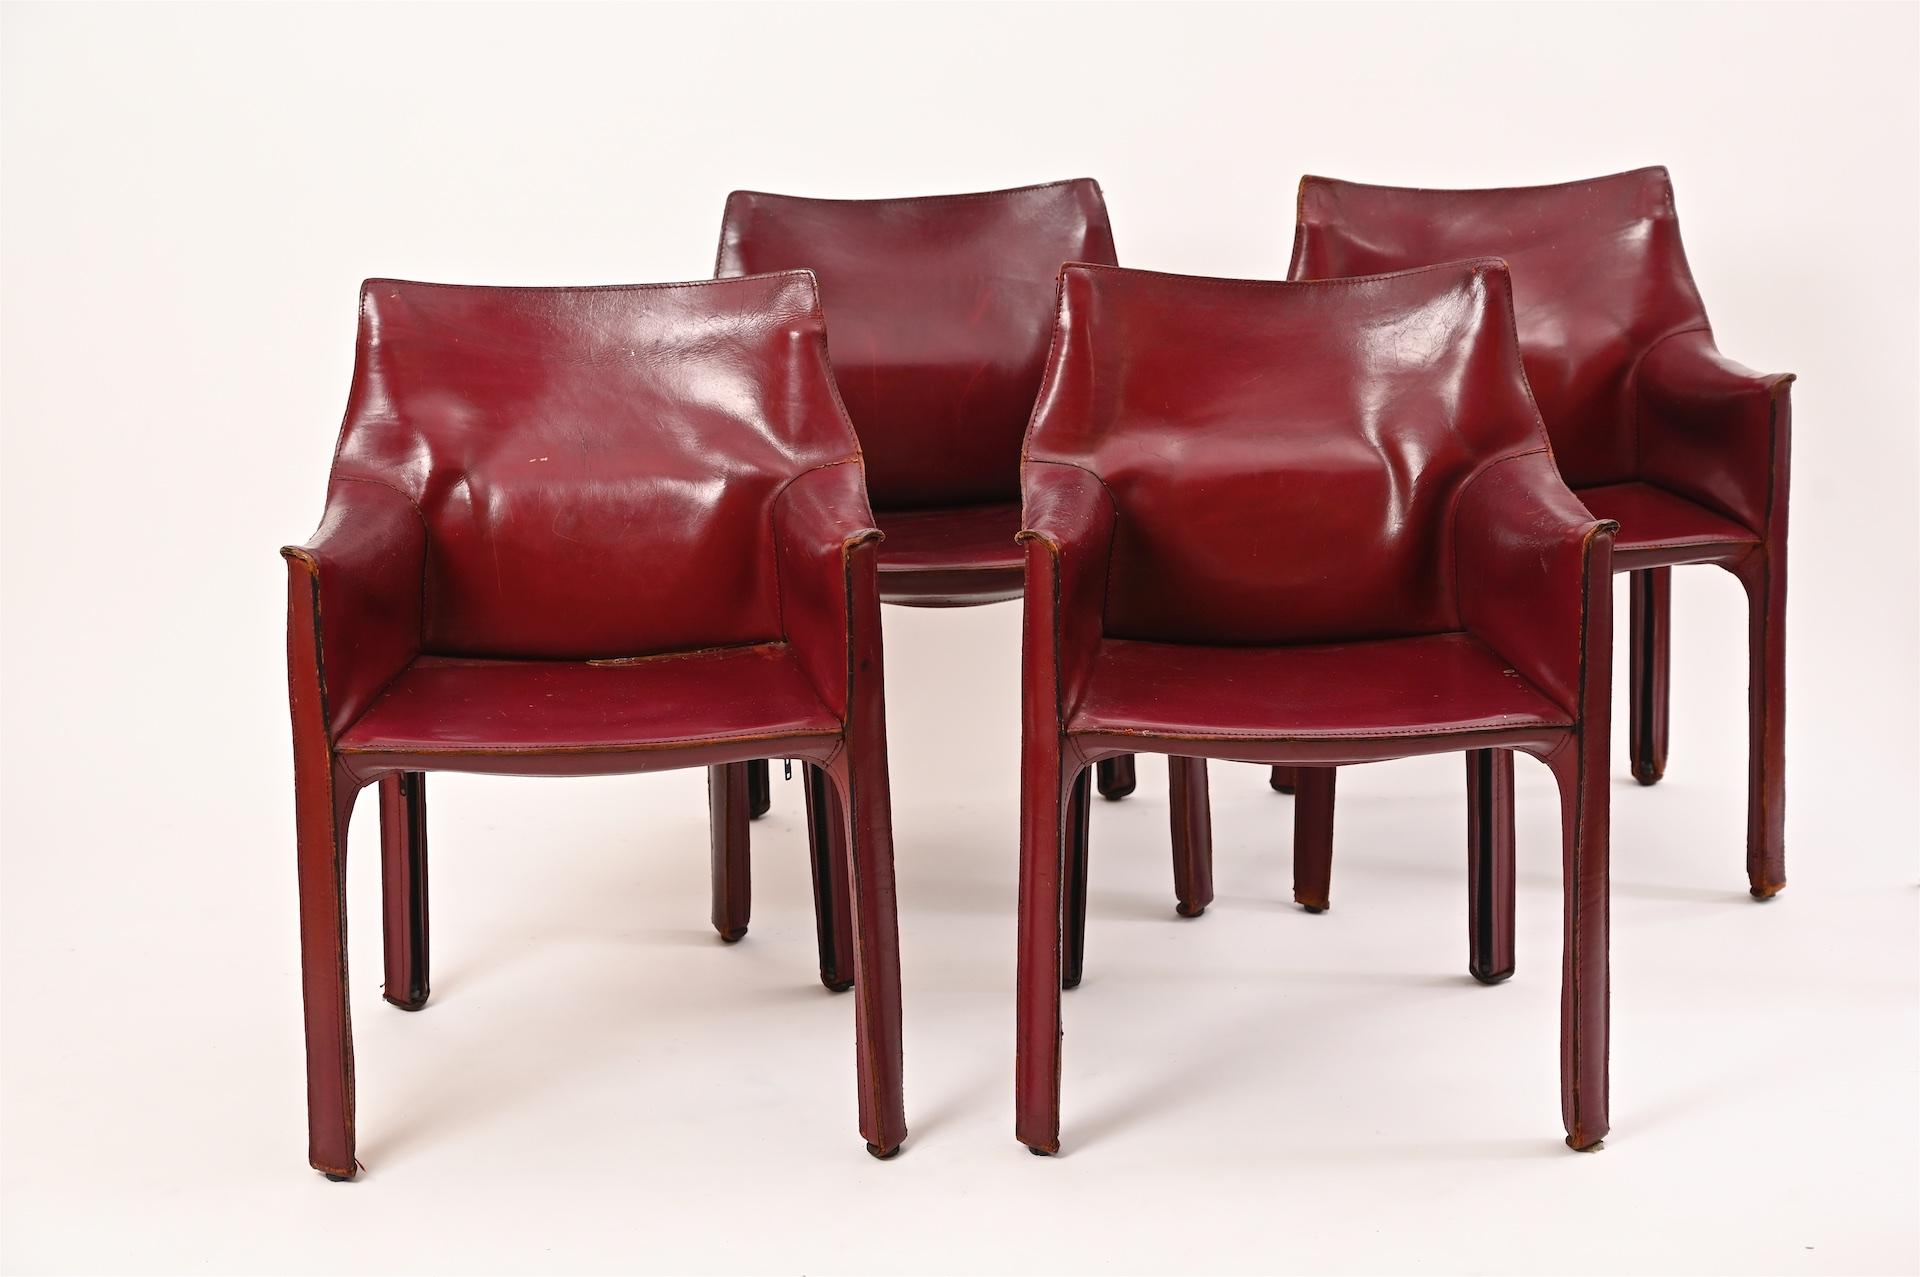 Four original Mario Bellini for Cassina Cab armchairs in Burgundy red.

Stitched leather with zips over steel frame structure.

Leather is nicely worn with good patina.

Some marks and scratches to leather. No tears. Structurally sound. And